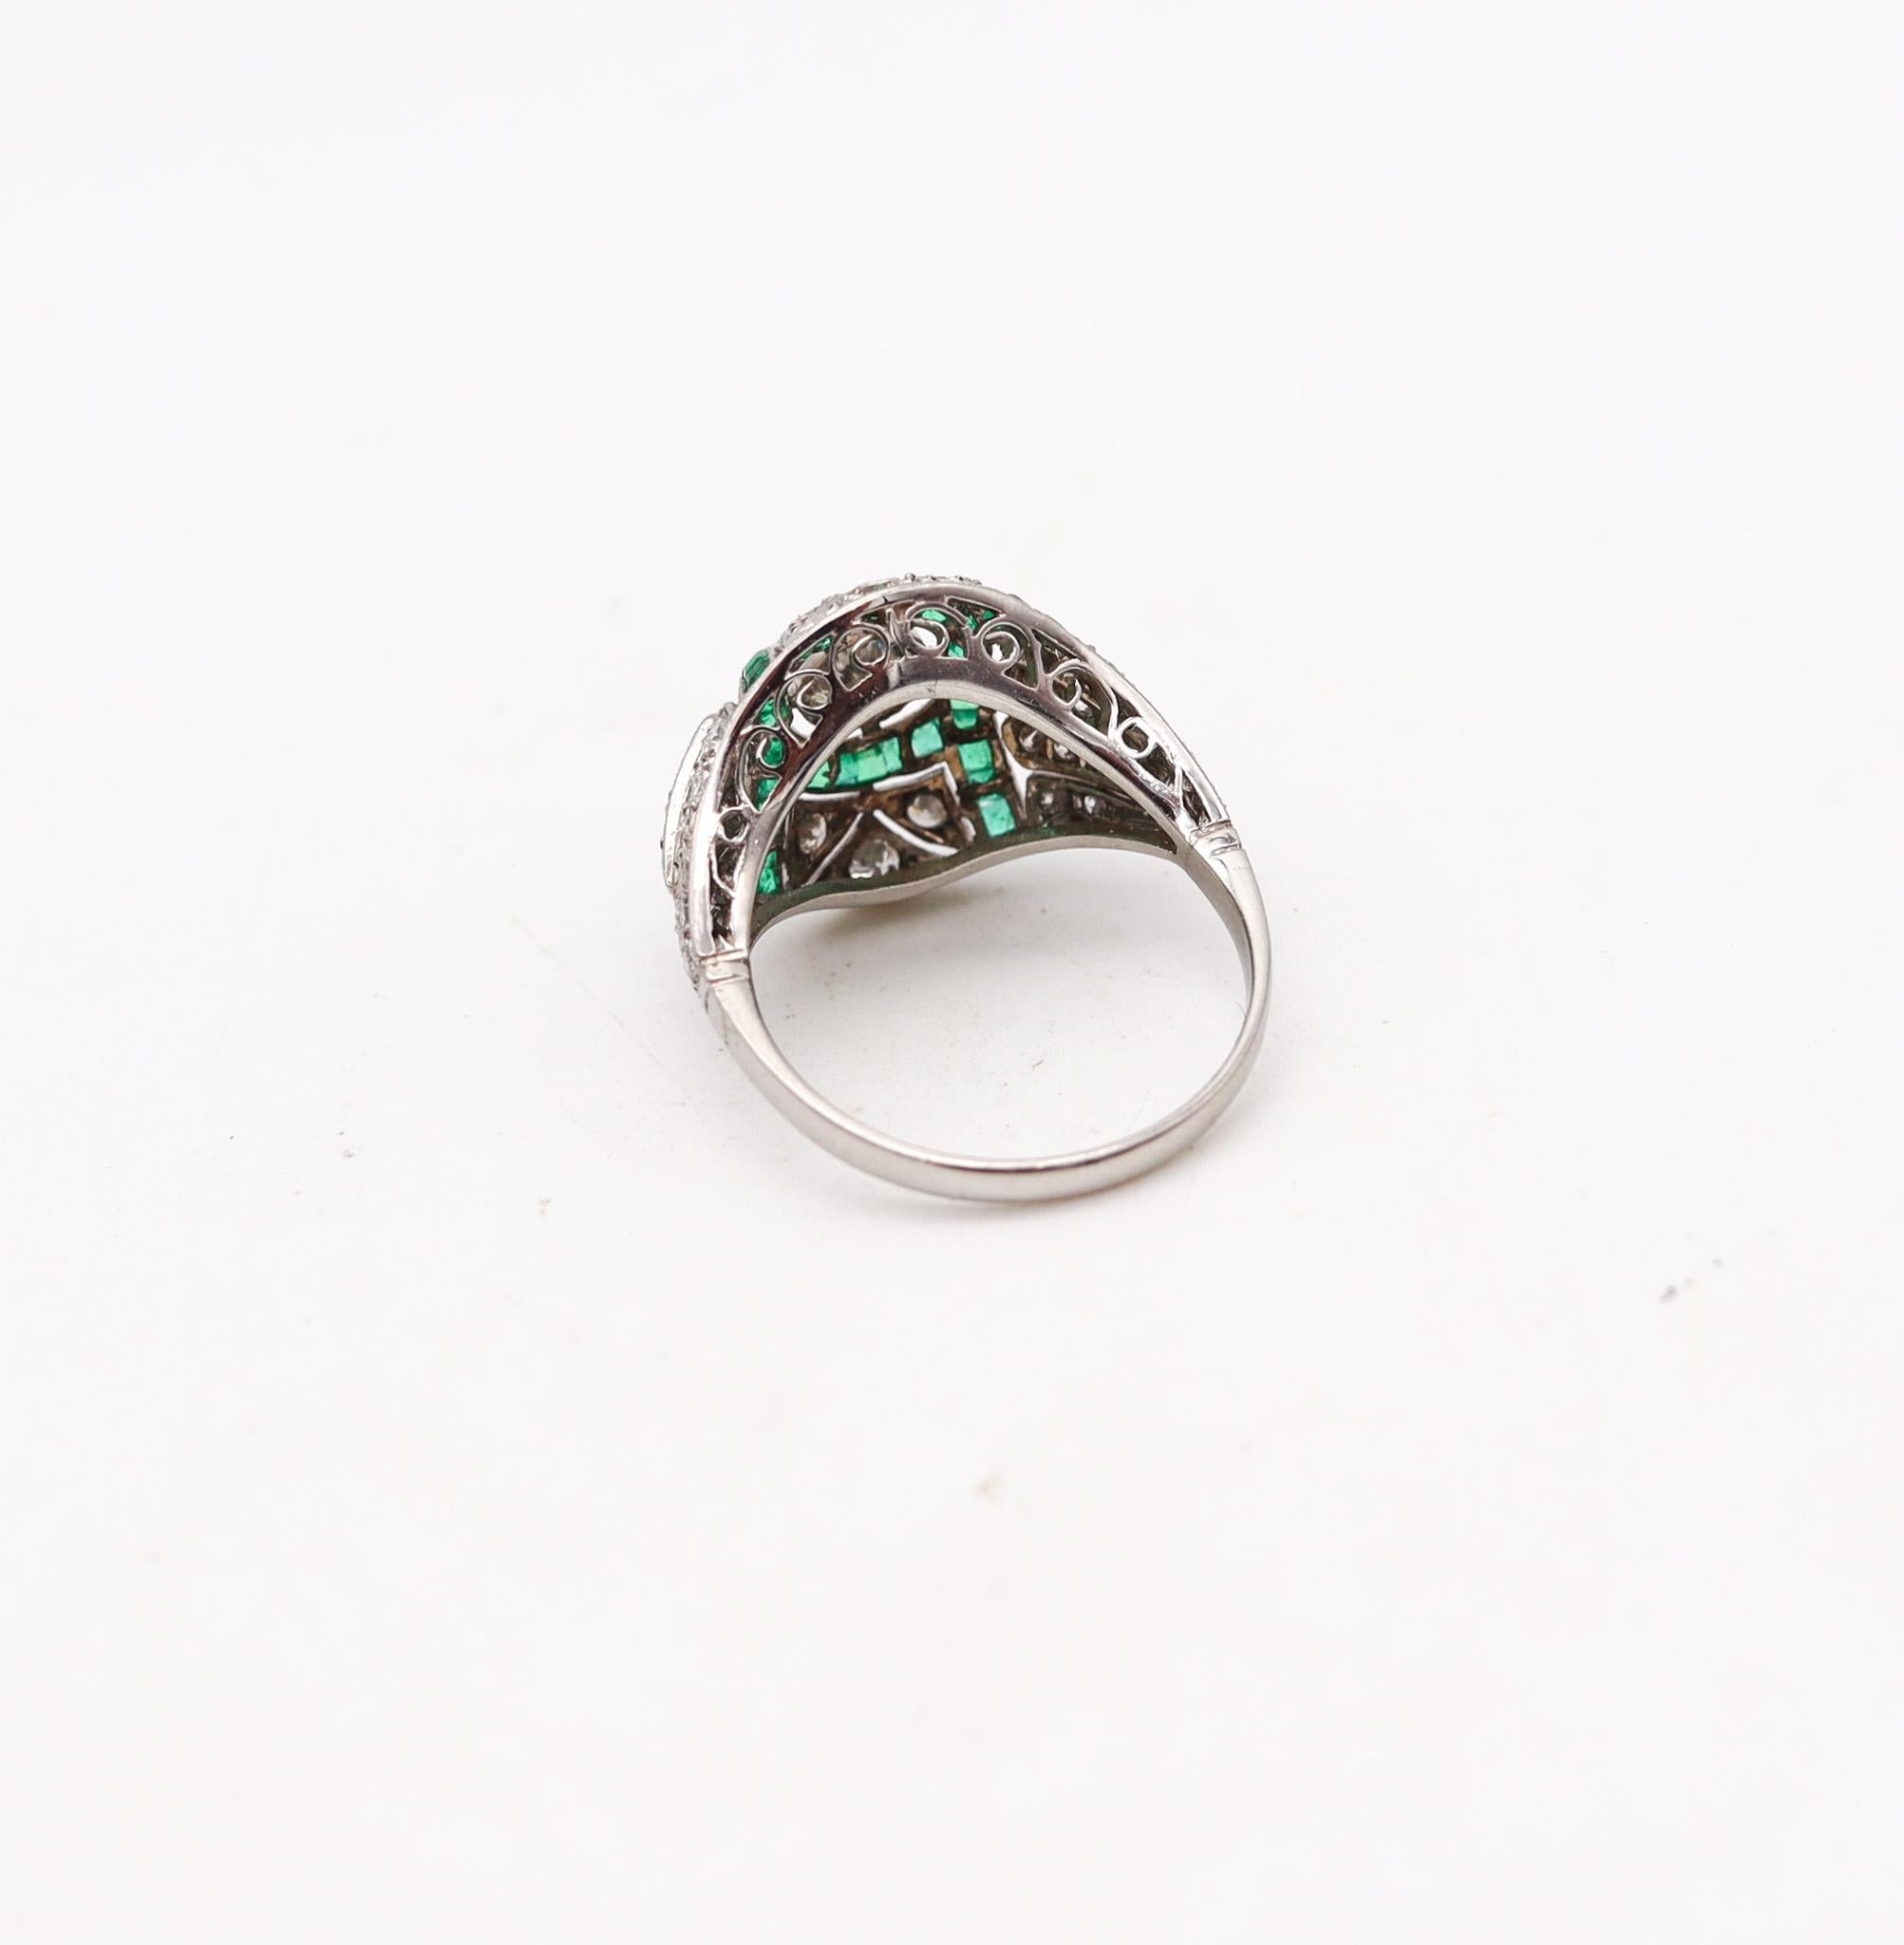 Art Deco 1930 Cocktail Bombe Ring In Platinum With 3.19 Ctw Diamonds And Emerald In Excellent Condition For Sale In Miami, FL